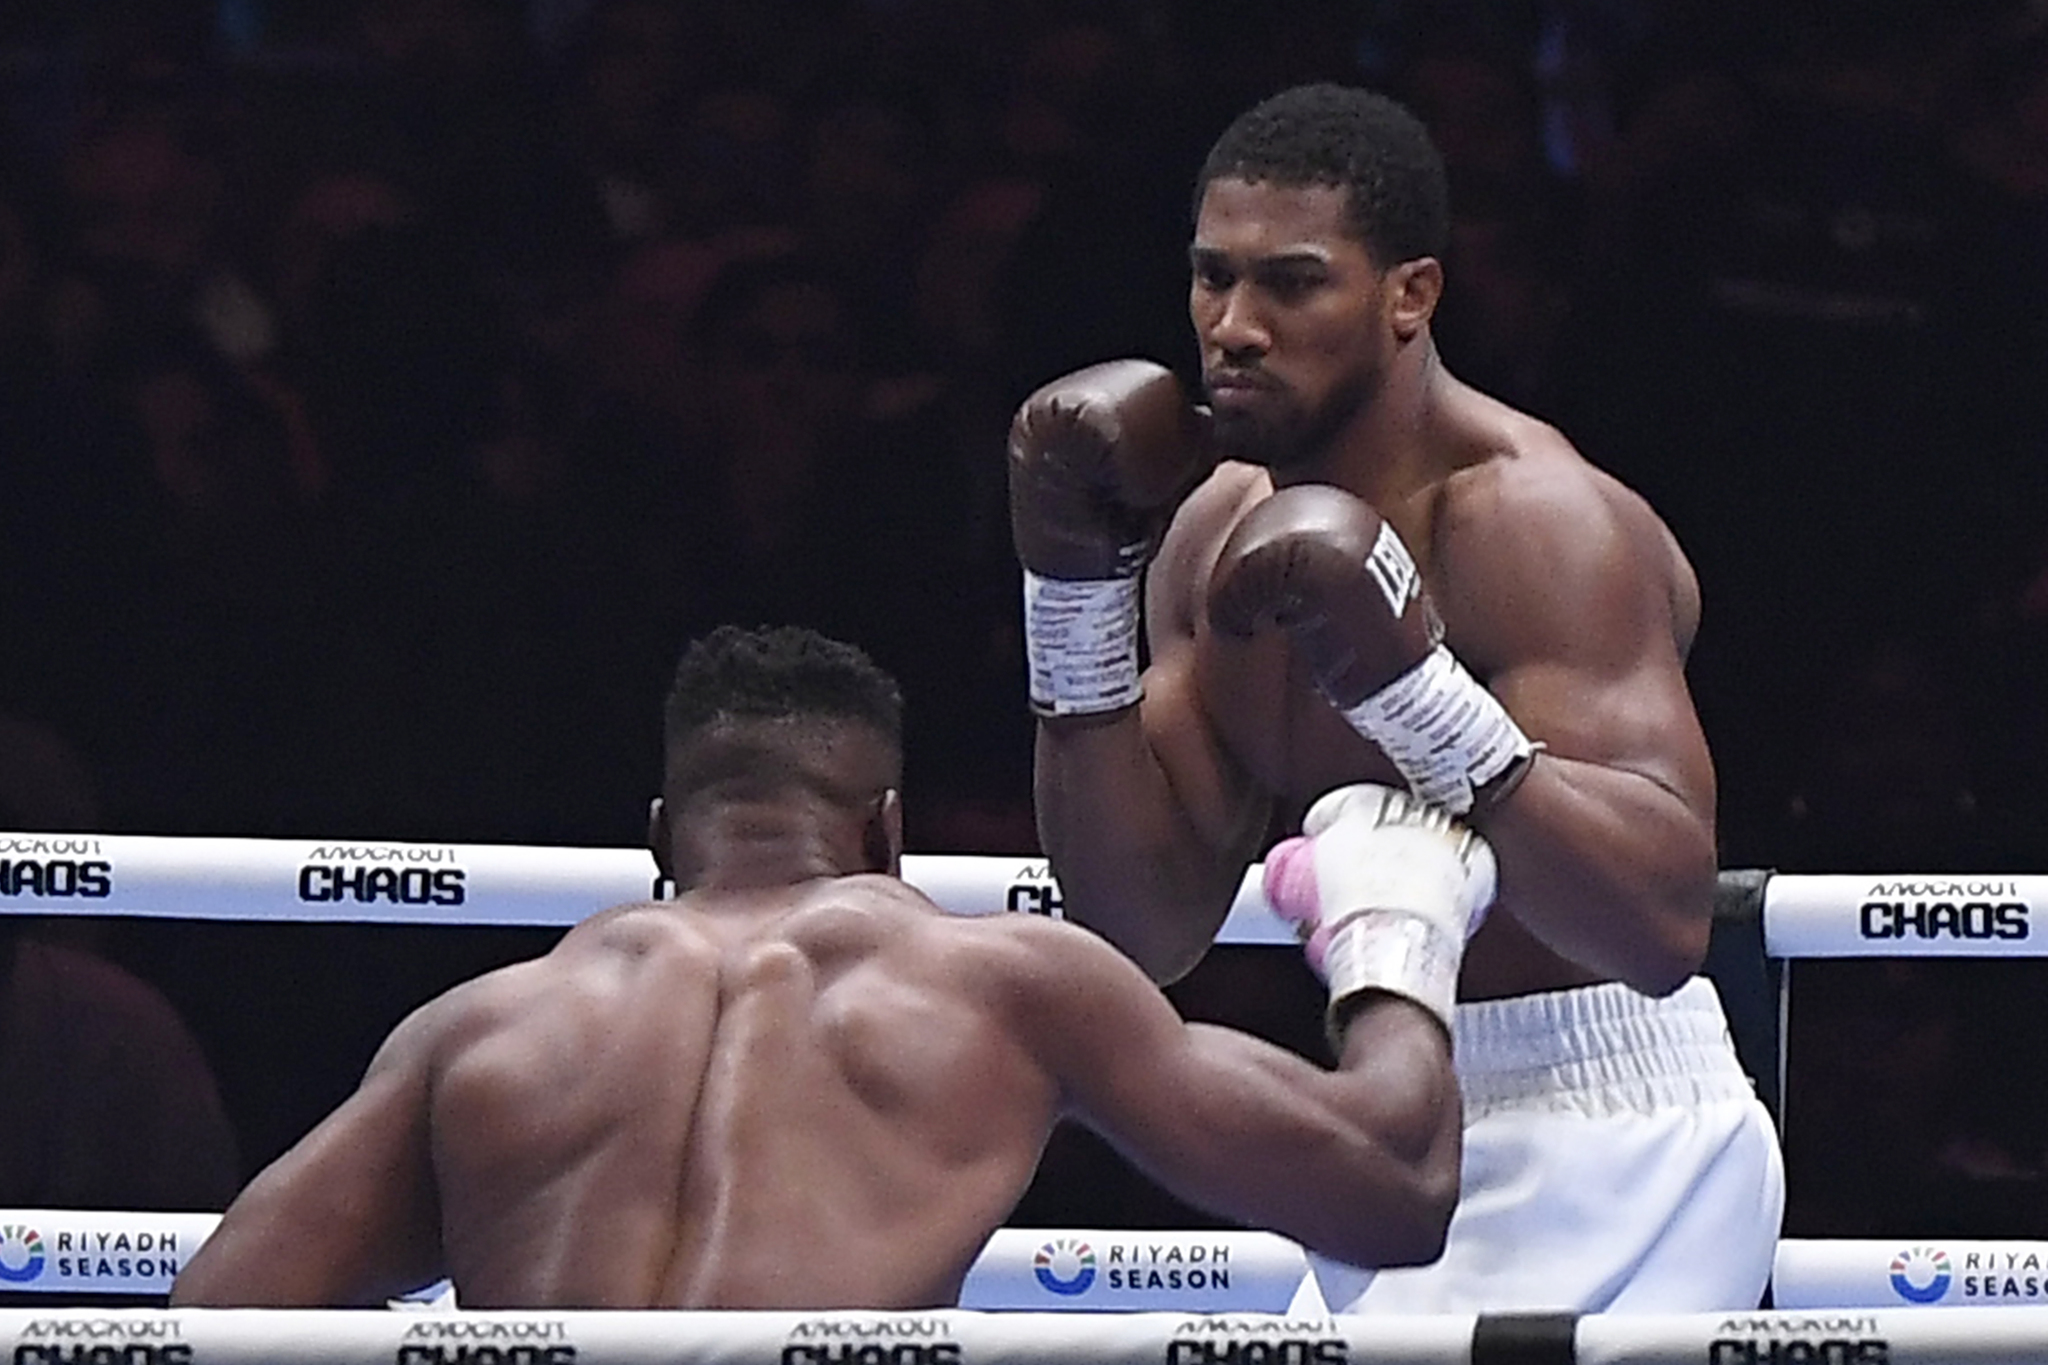 Anthony Joshua came out on top